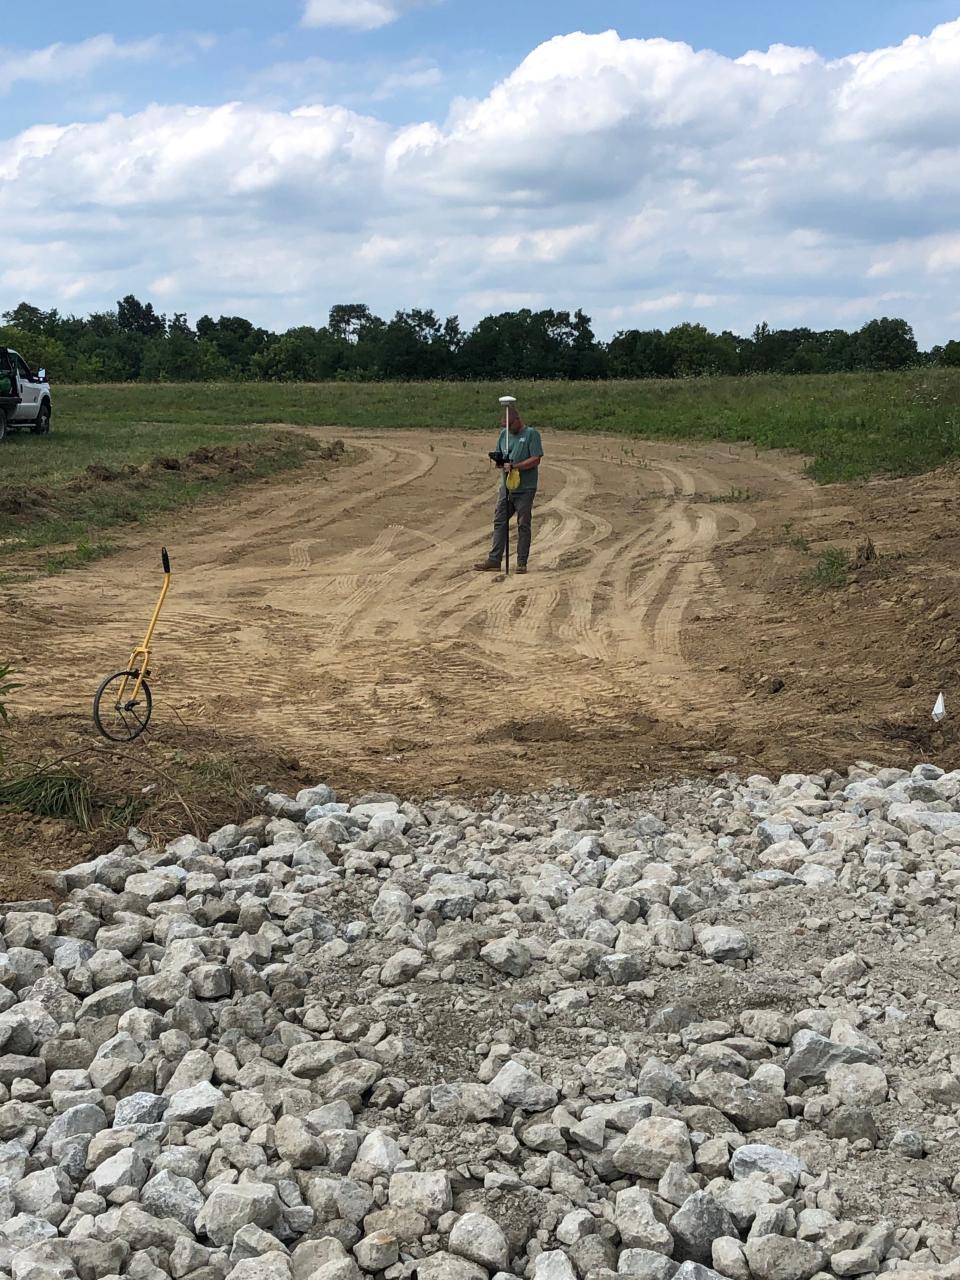 The Soil & Water Conservation District works to eliminate soil erosion on farms by building grass waterways in fields. Seen here is a waterway being built and inspected before the grass is planted.